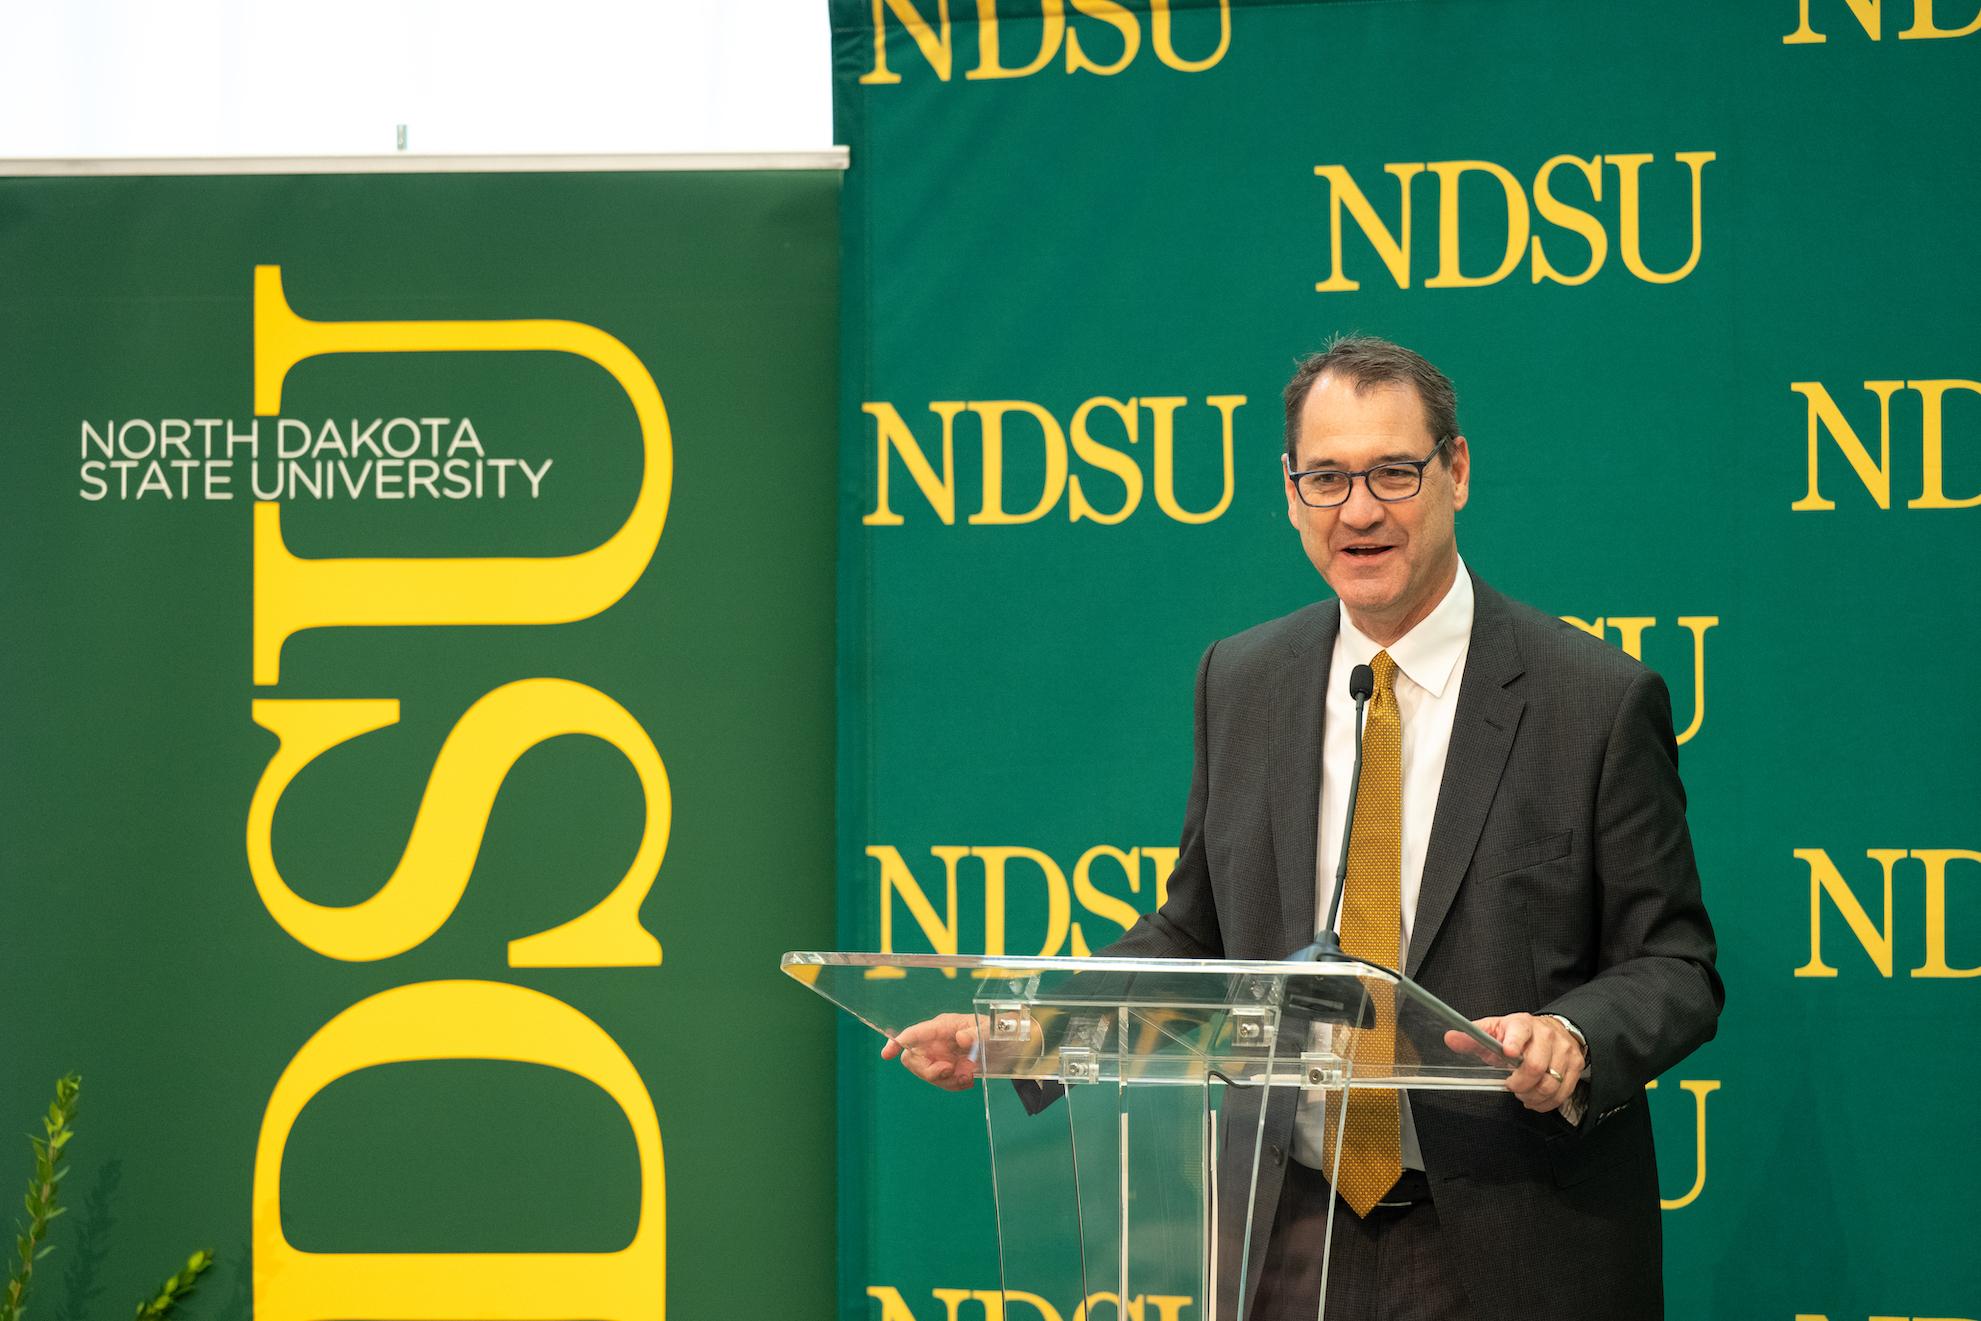 NDSU President David Cook speaks at Foundation event on Friday, Oct. 27